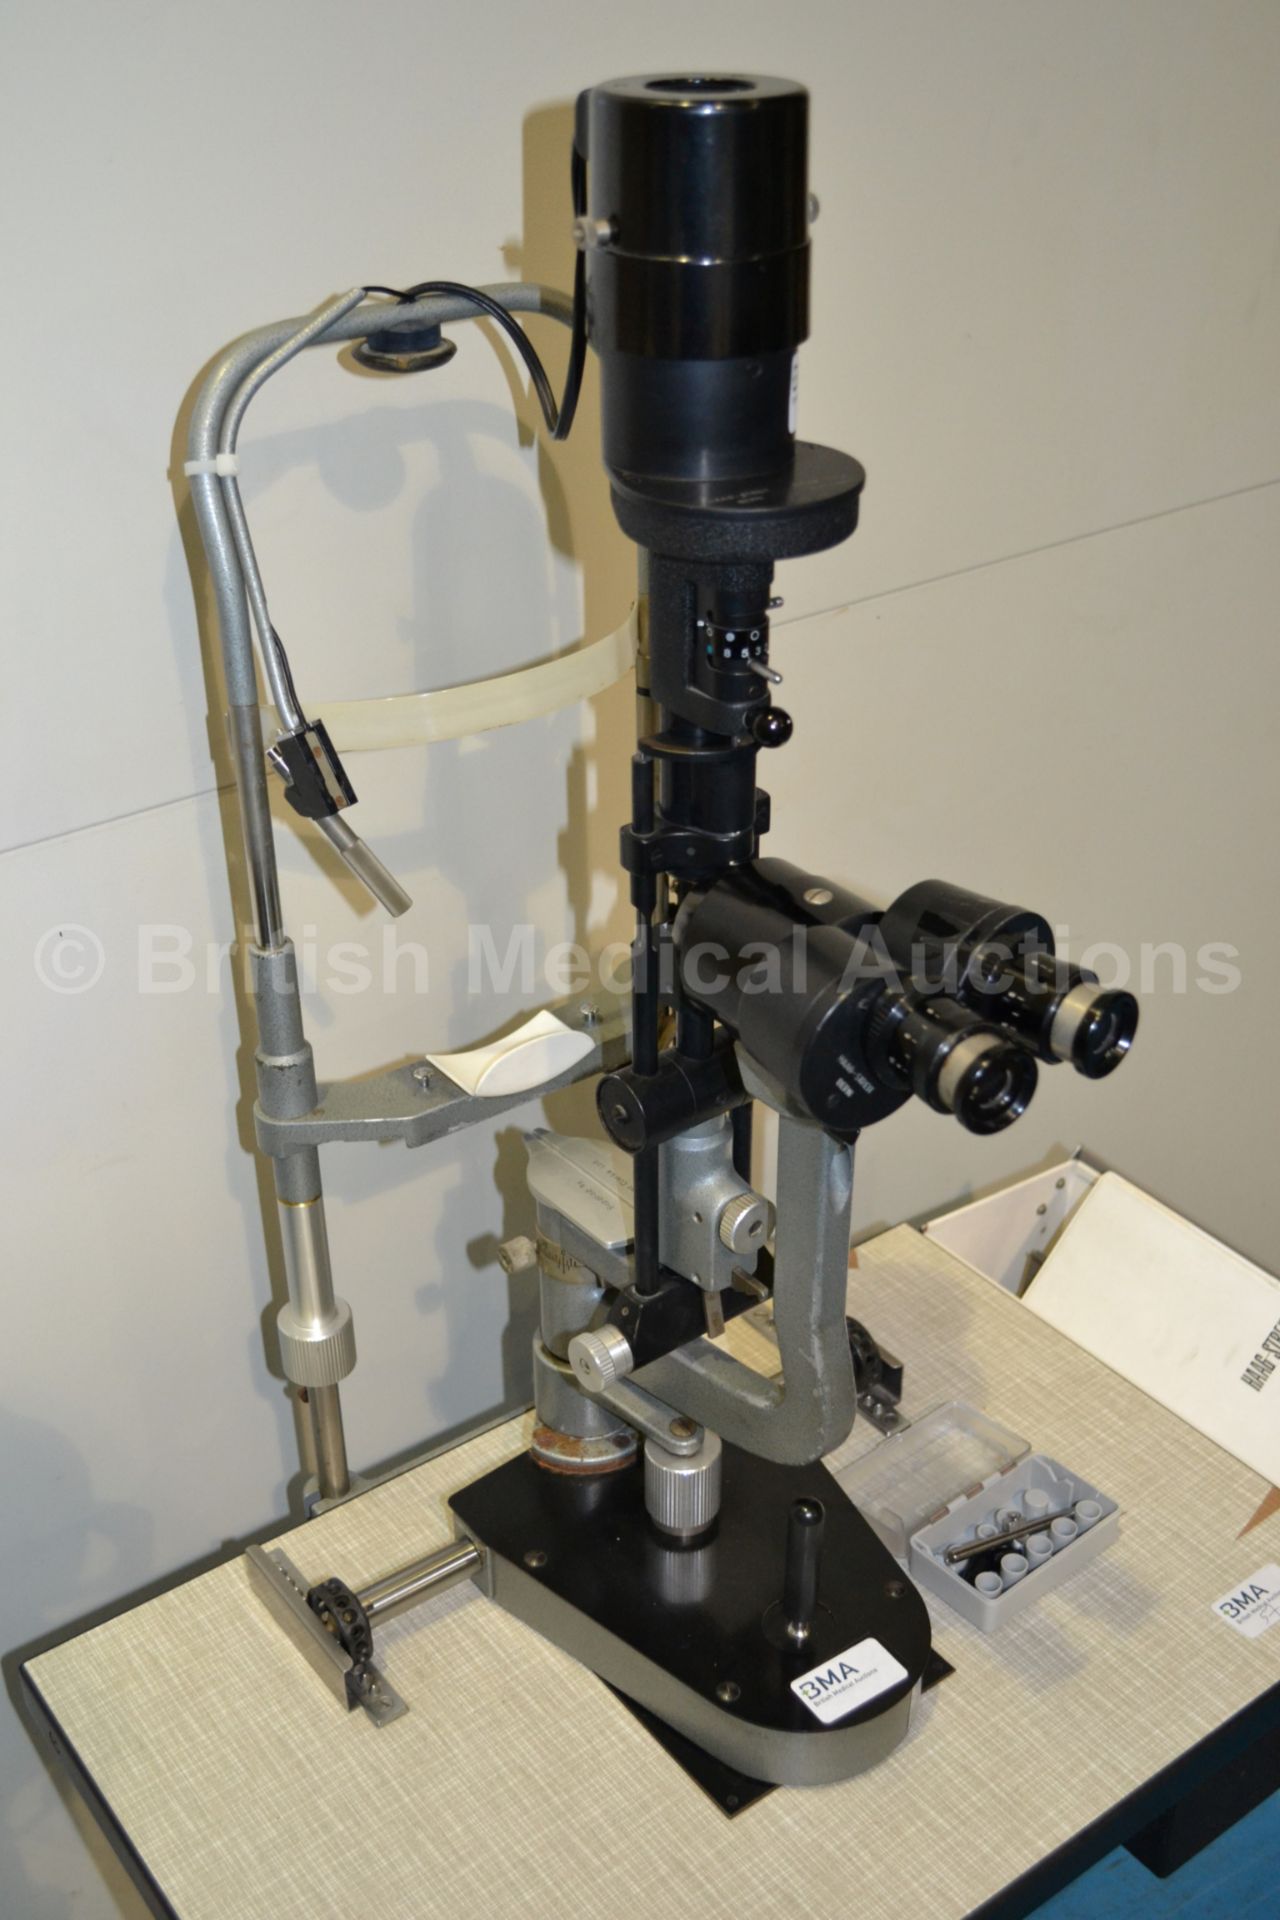 Haag Streit Slit Lamp 900 - Untested Due to Cut Pl - Image 4 of 5